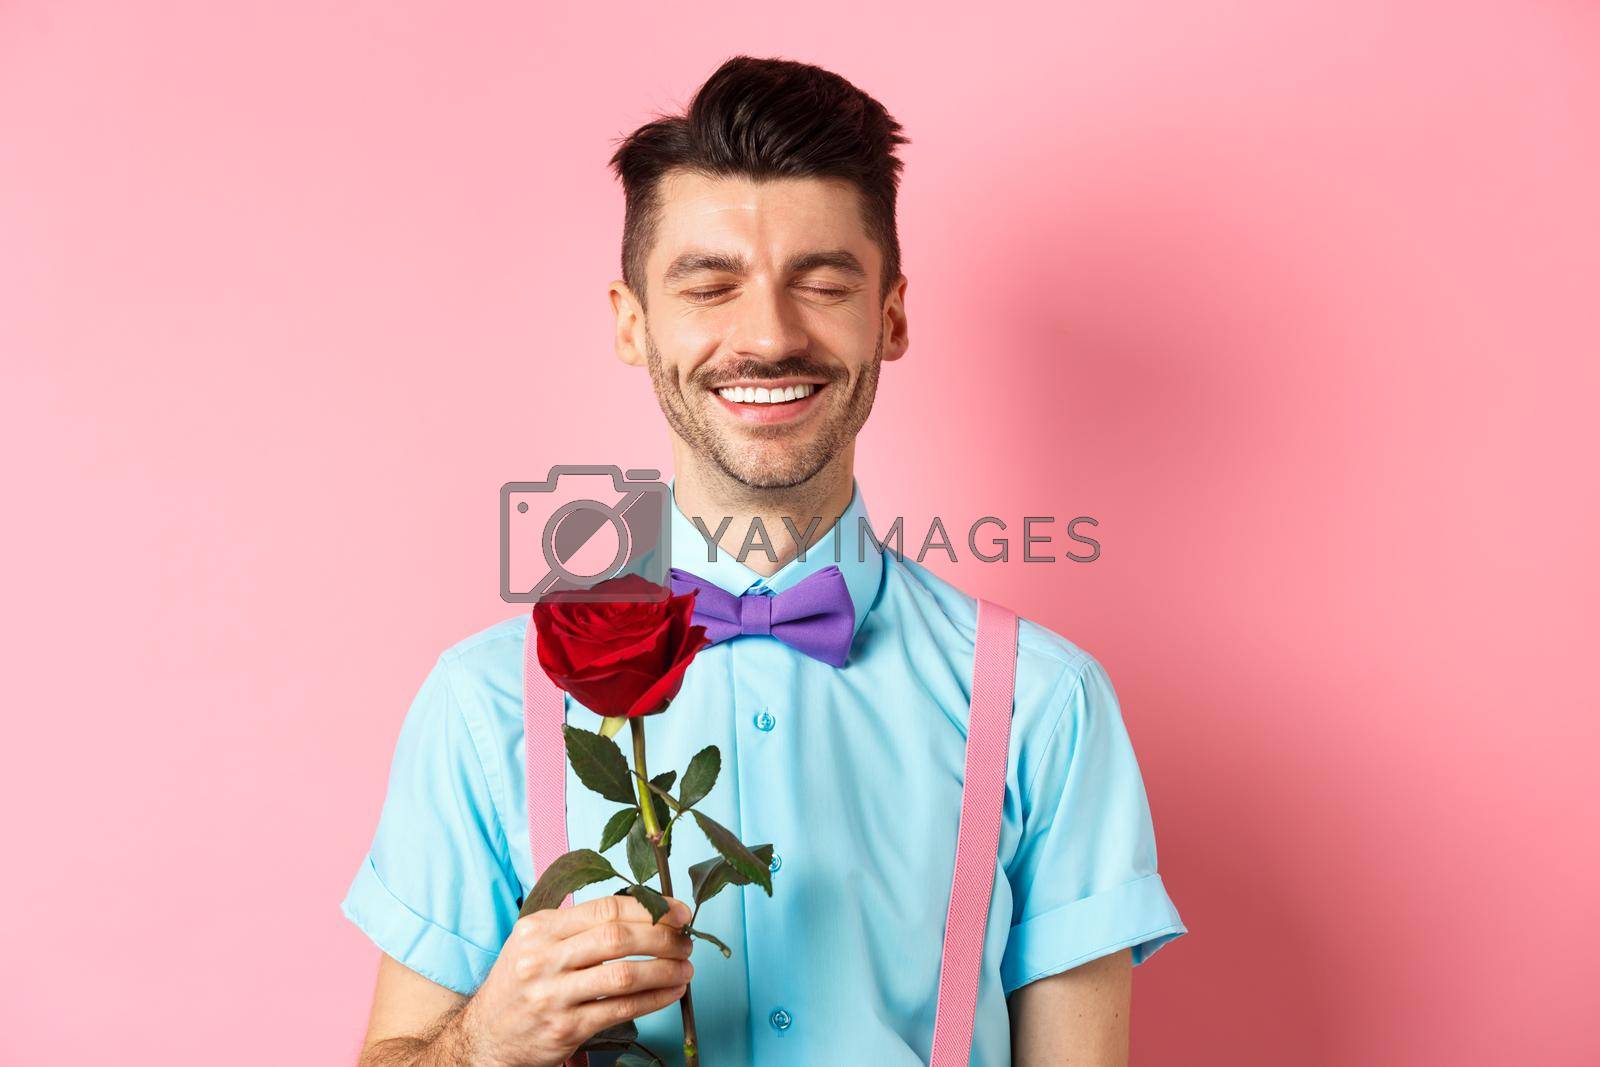 Valentines day and romance concept. Romantic man with red rose going on date with lover, standing in fancy bow-tie on pink background.